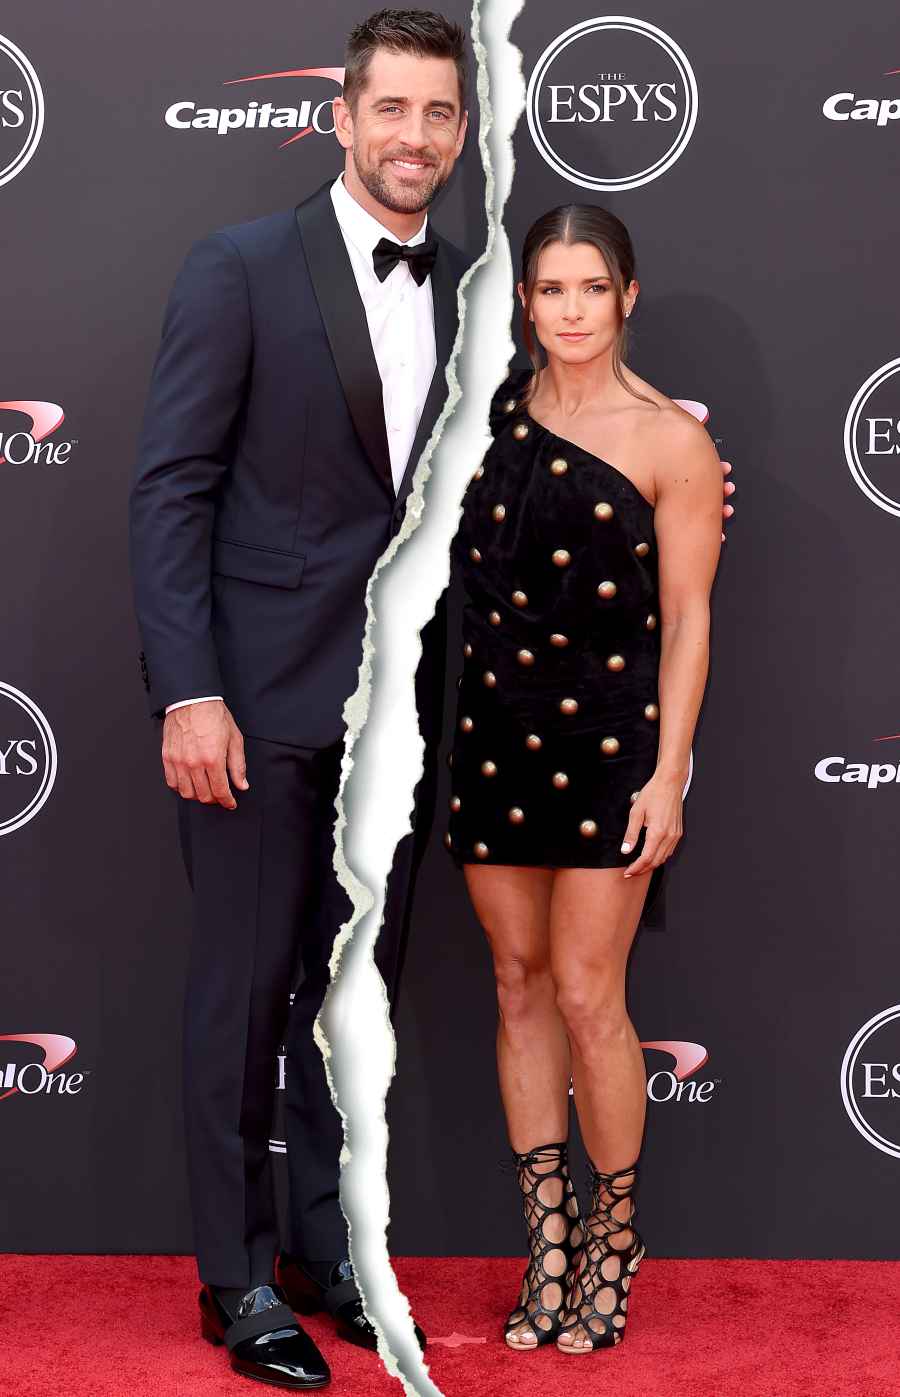 Aaron Rodgers Danica Patrick Split After 2 Years Together